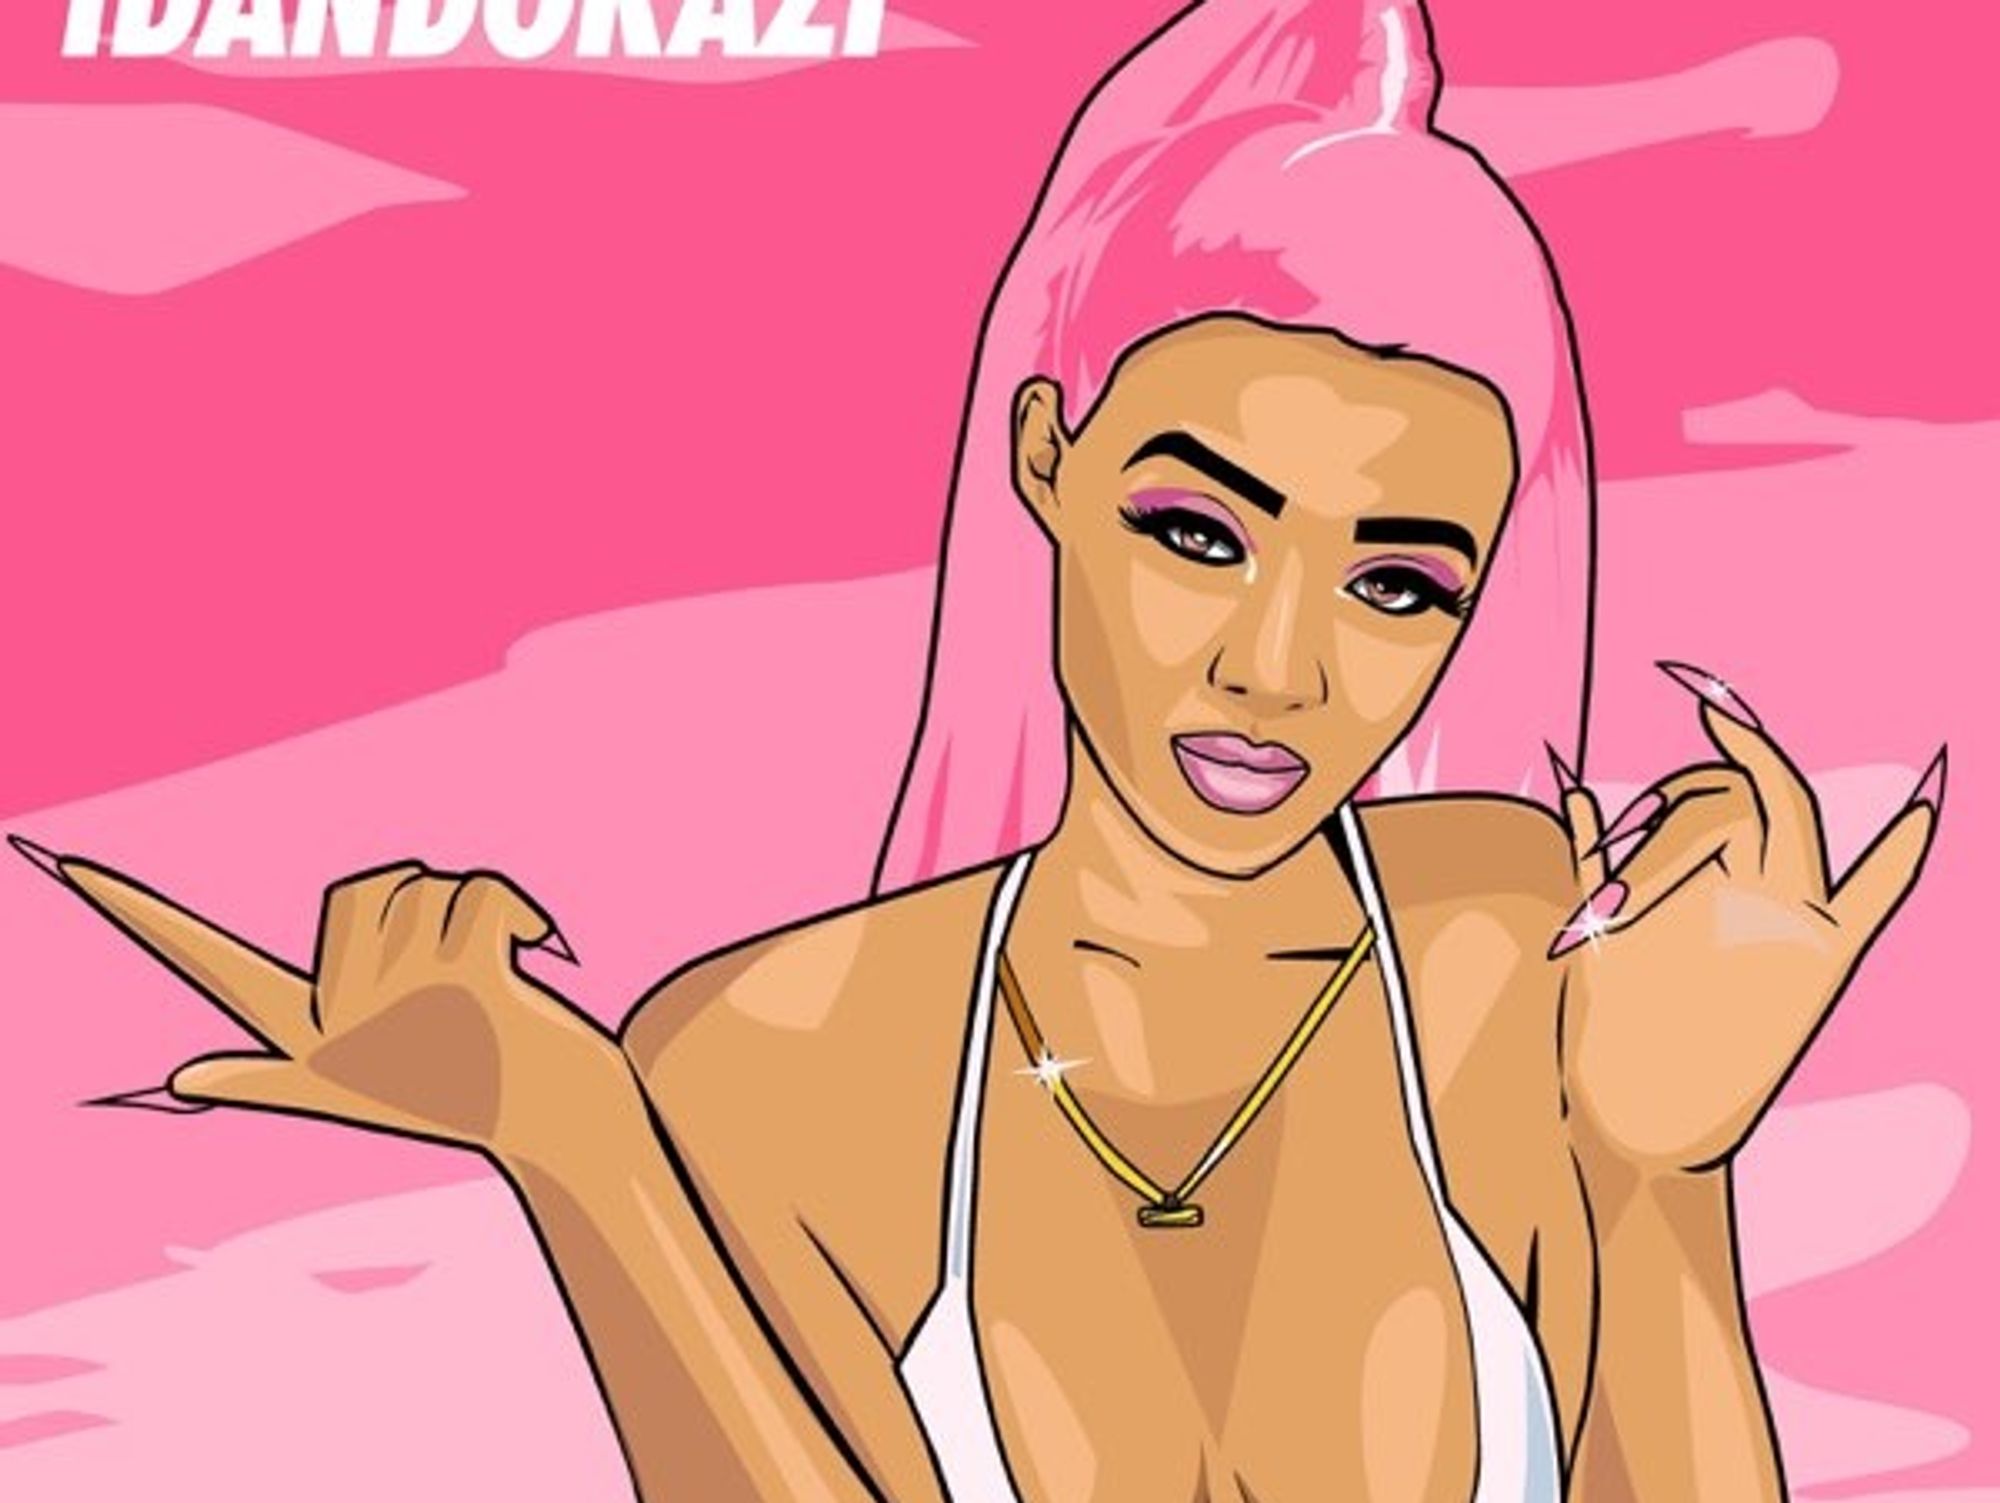 An illustration of Babes Wodumo in a bikini against a pink background. 